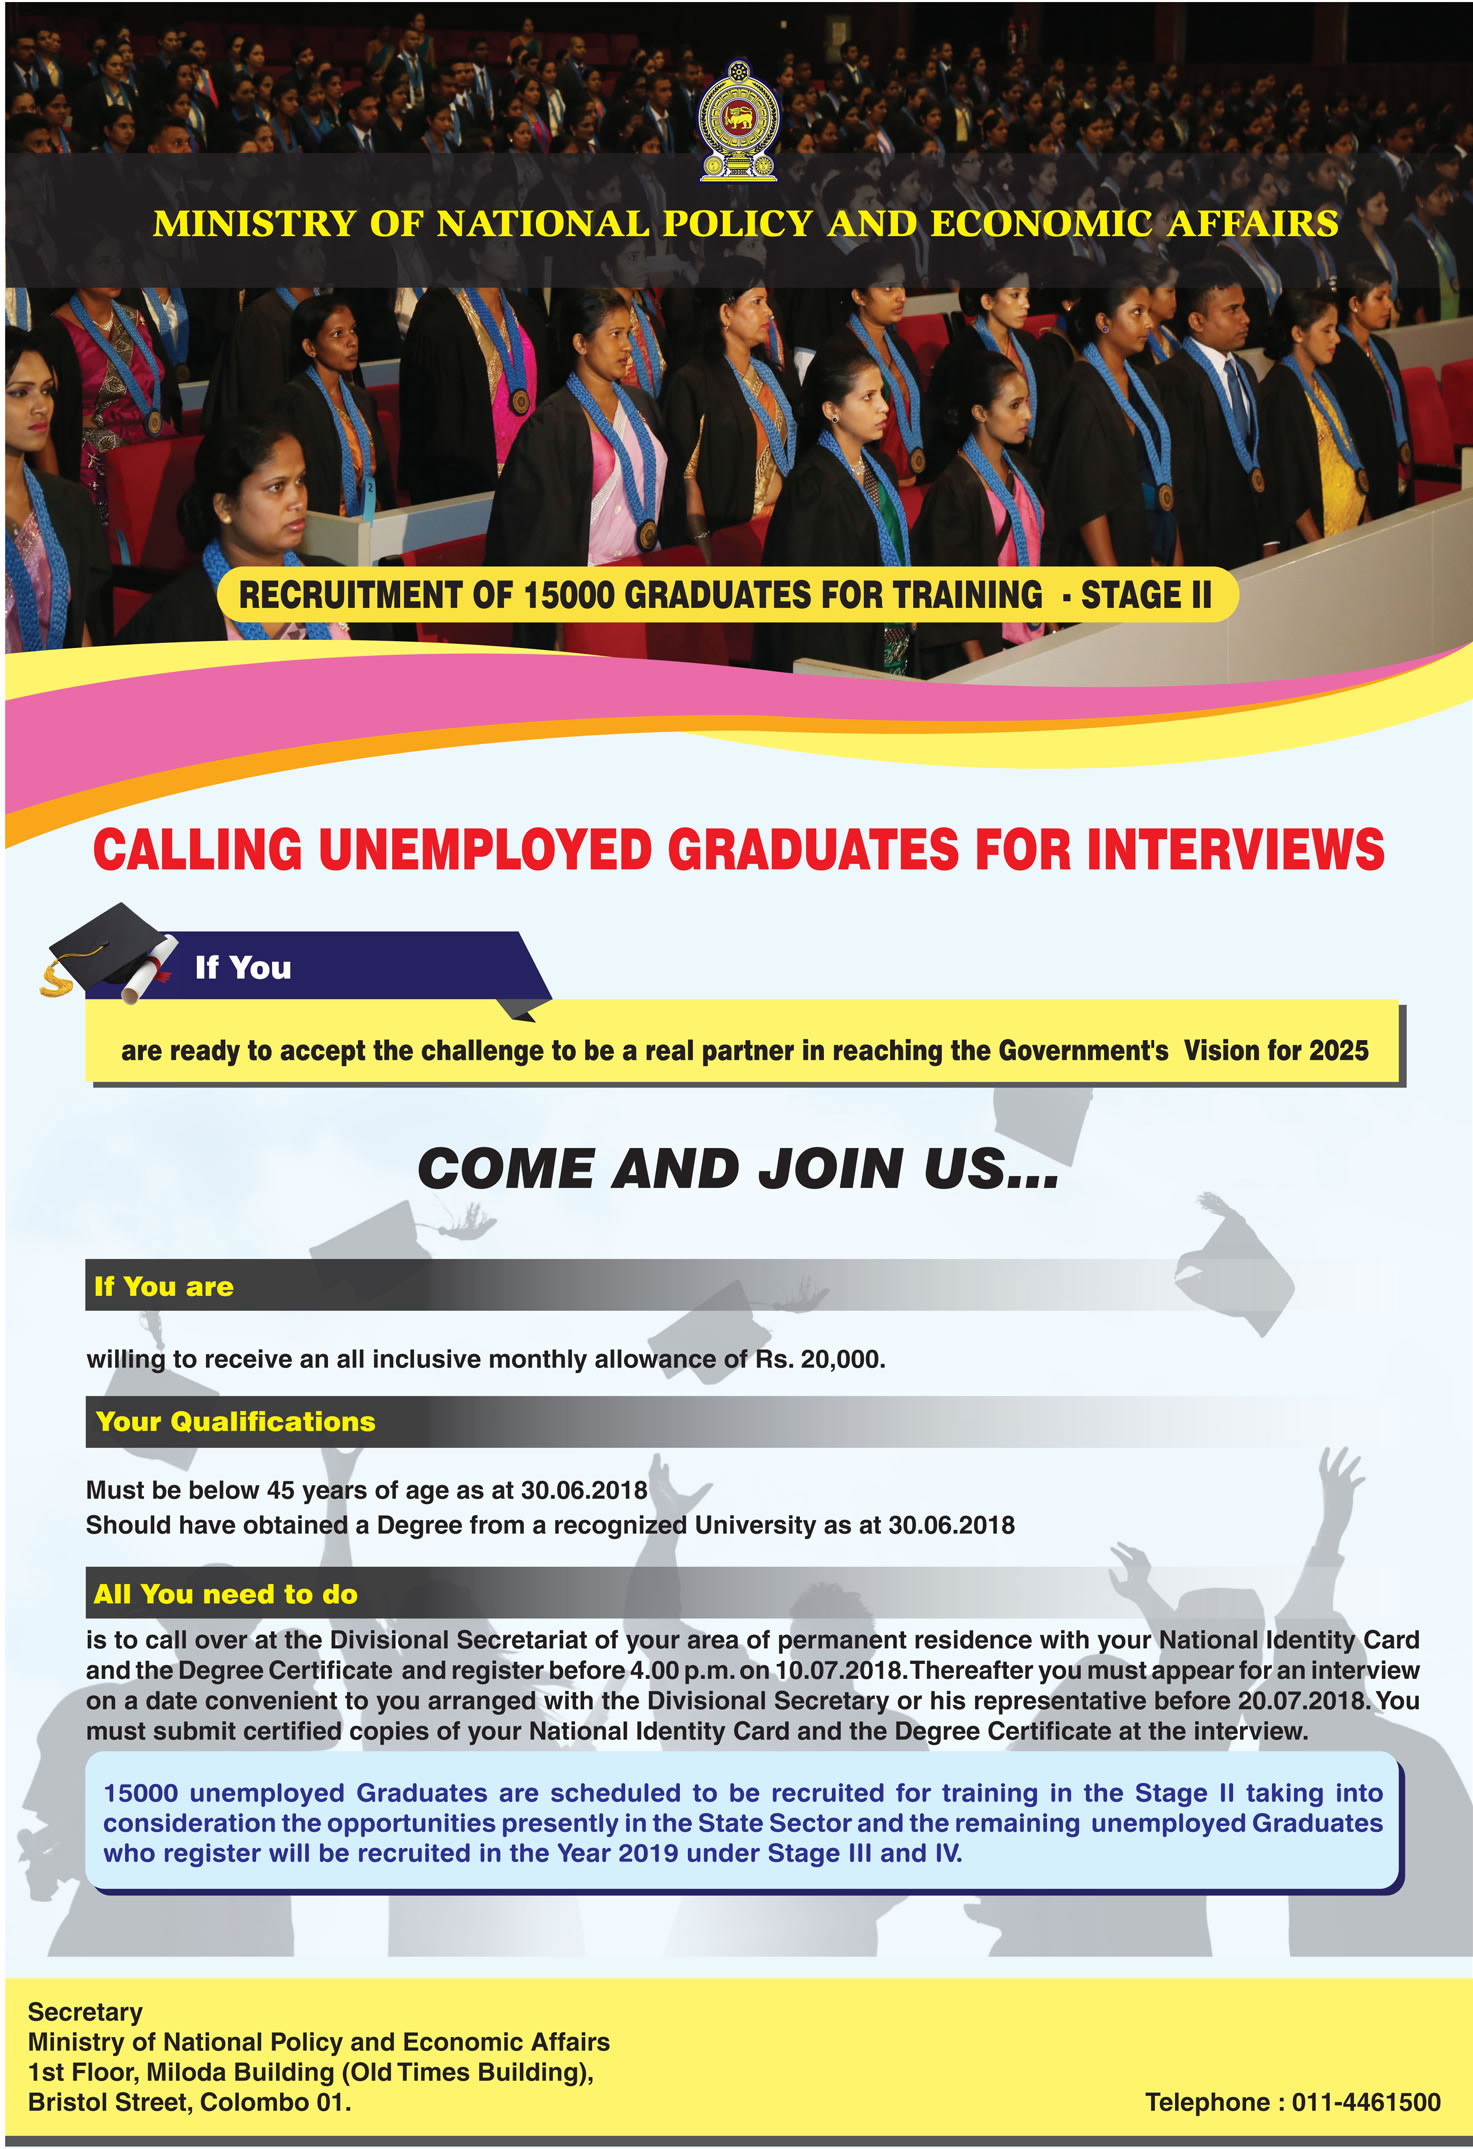 Calling Unemployed Graduates for Interviews - Ministry of National Policies and Economic Affairs